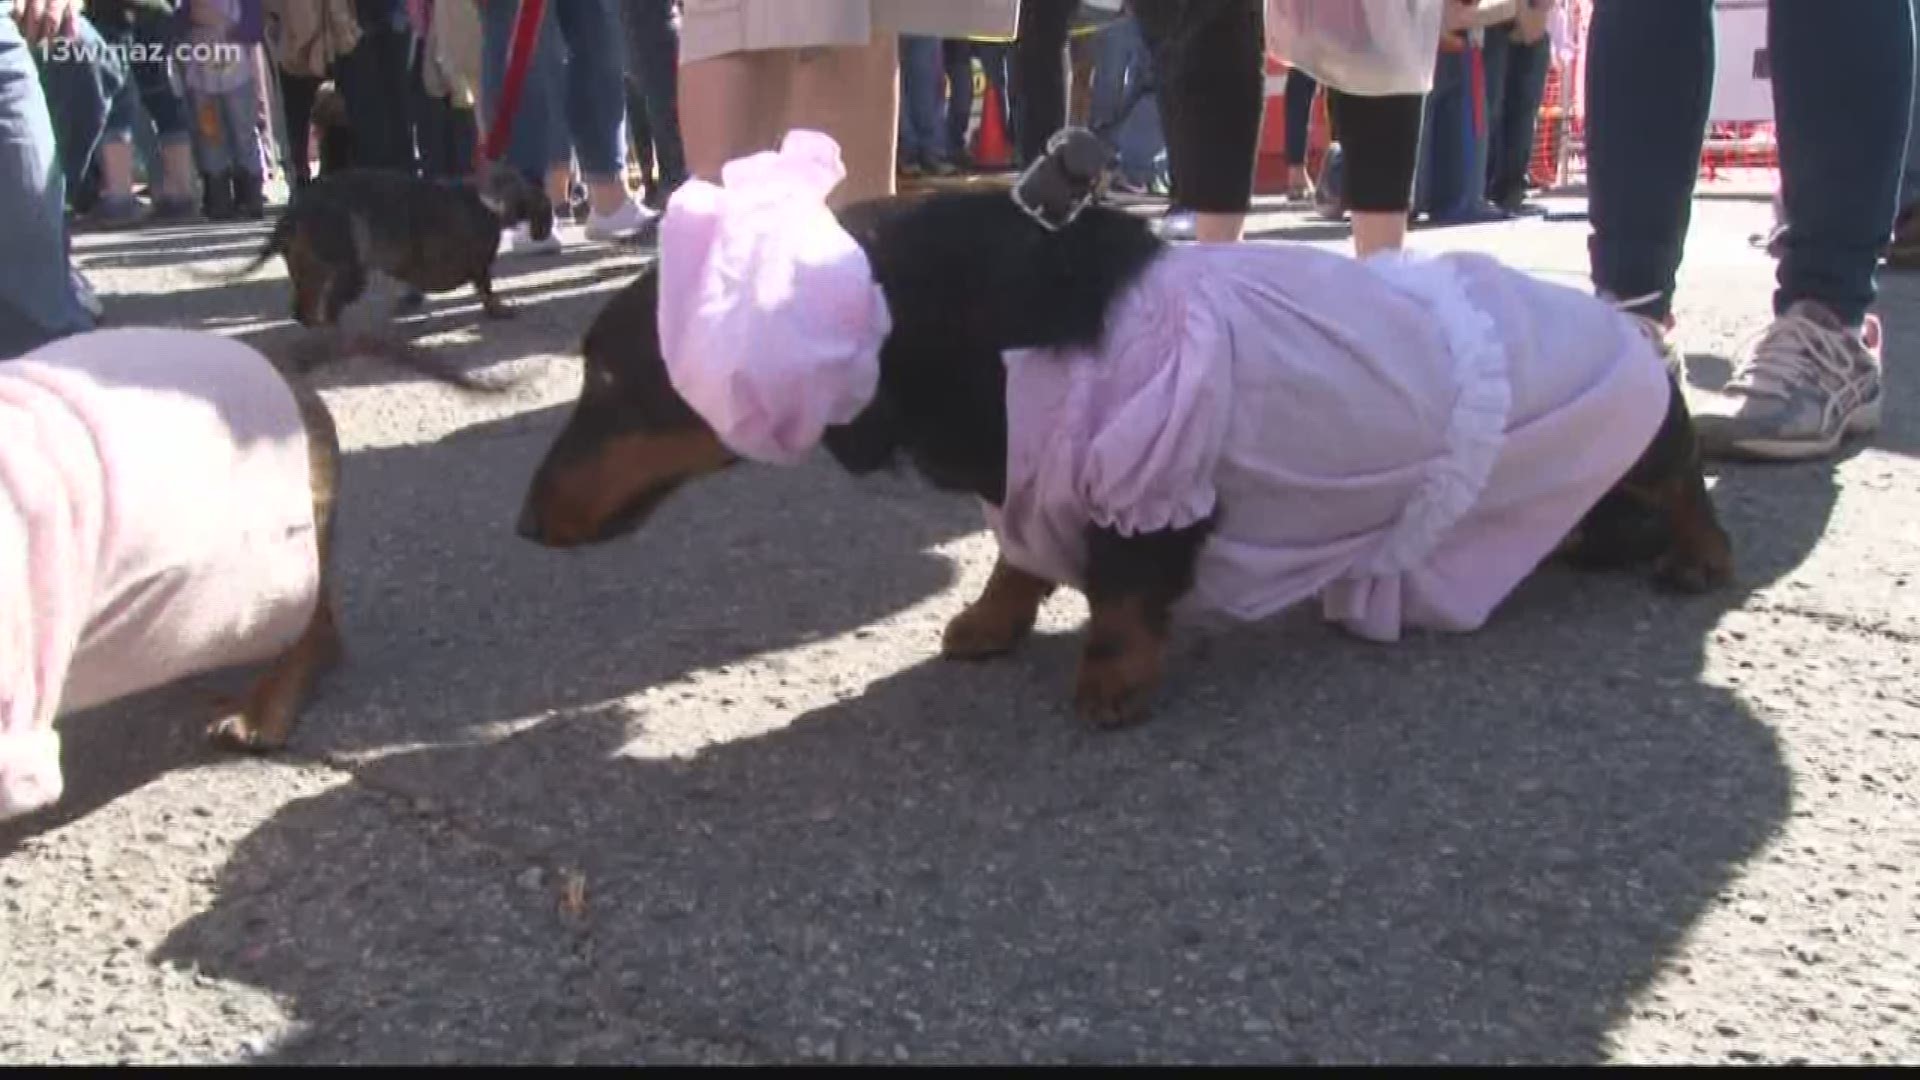 After the Pink Pancake Breakfast, wiener dogs raced in the first ever dog race for the Cherry Blossom Festival. About 49 dogs raced on Saturday morning down Cherry Street.